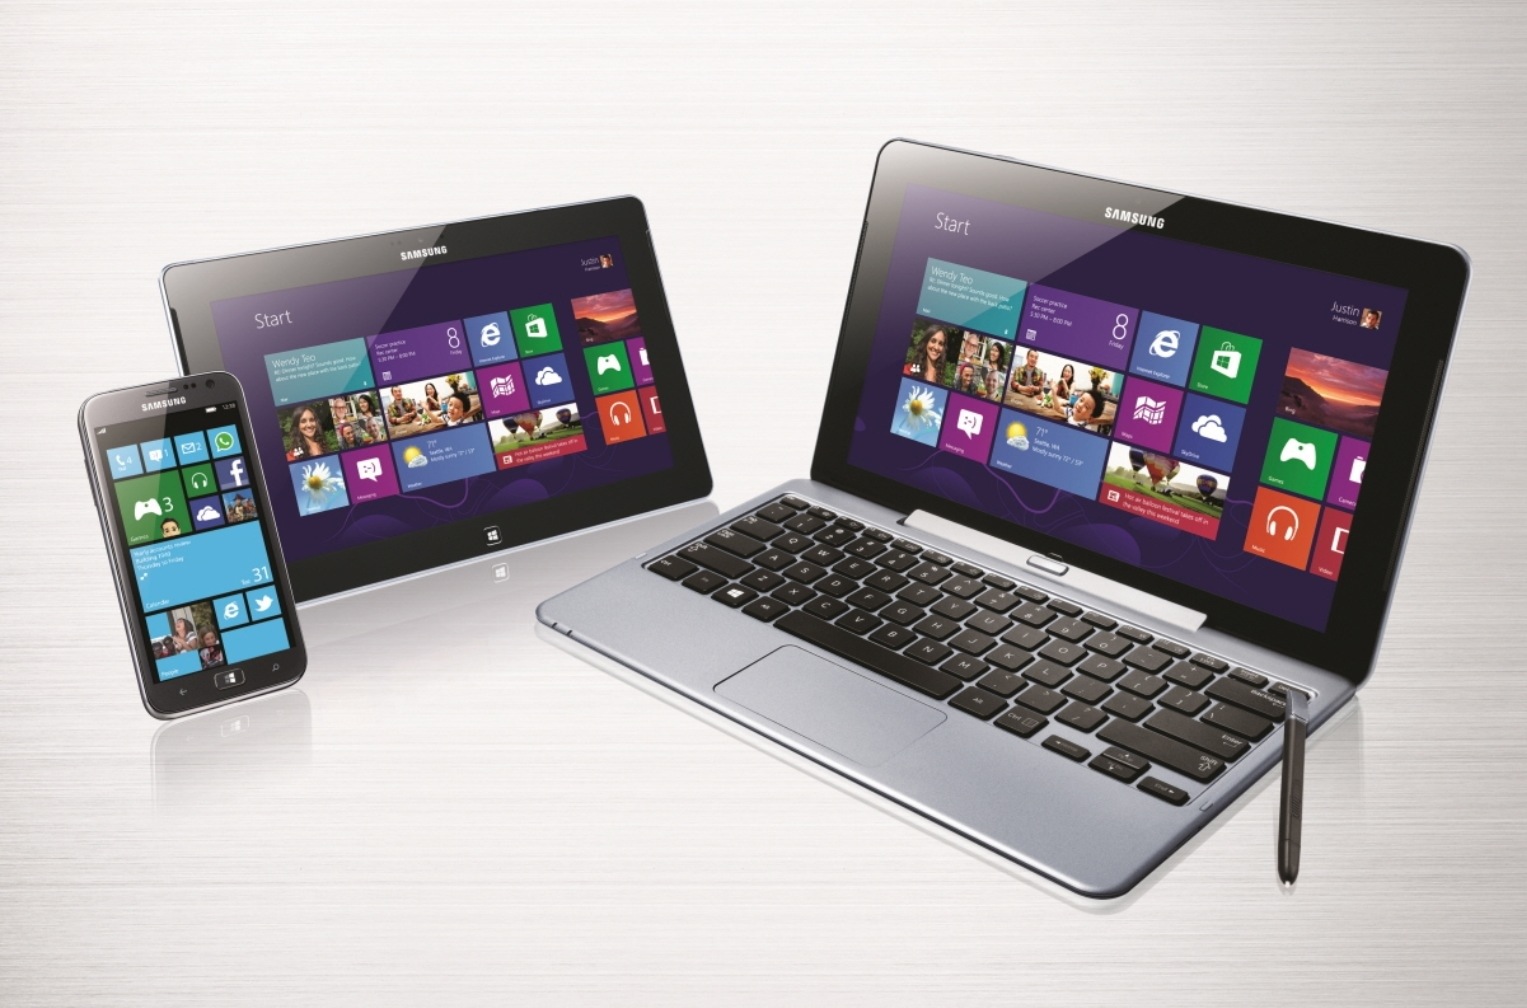 Microsoft Helps Businesses Select Best Windows 8 Devices